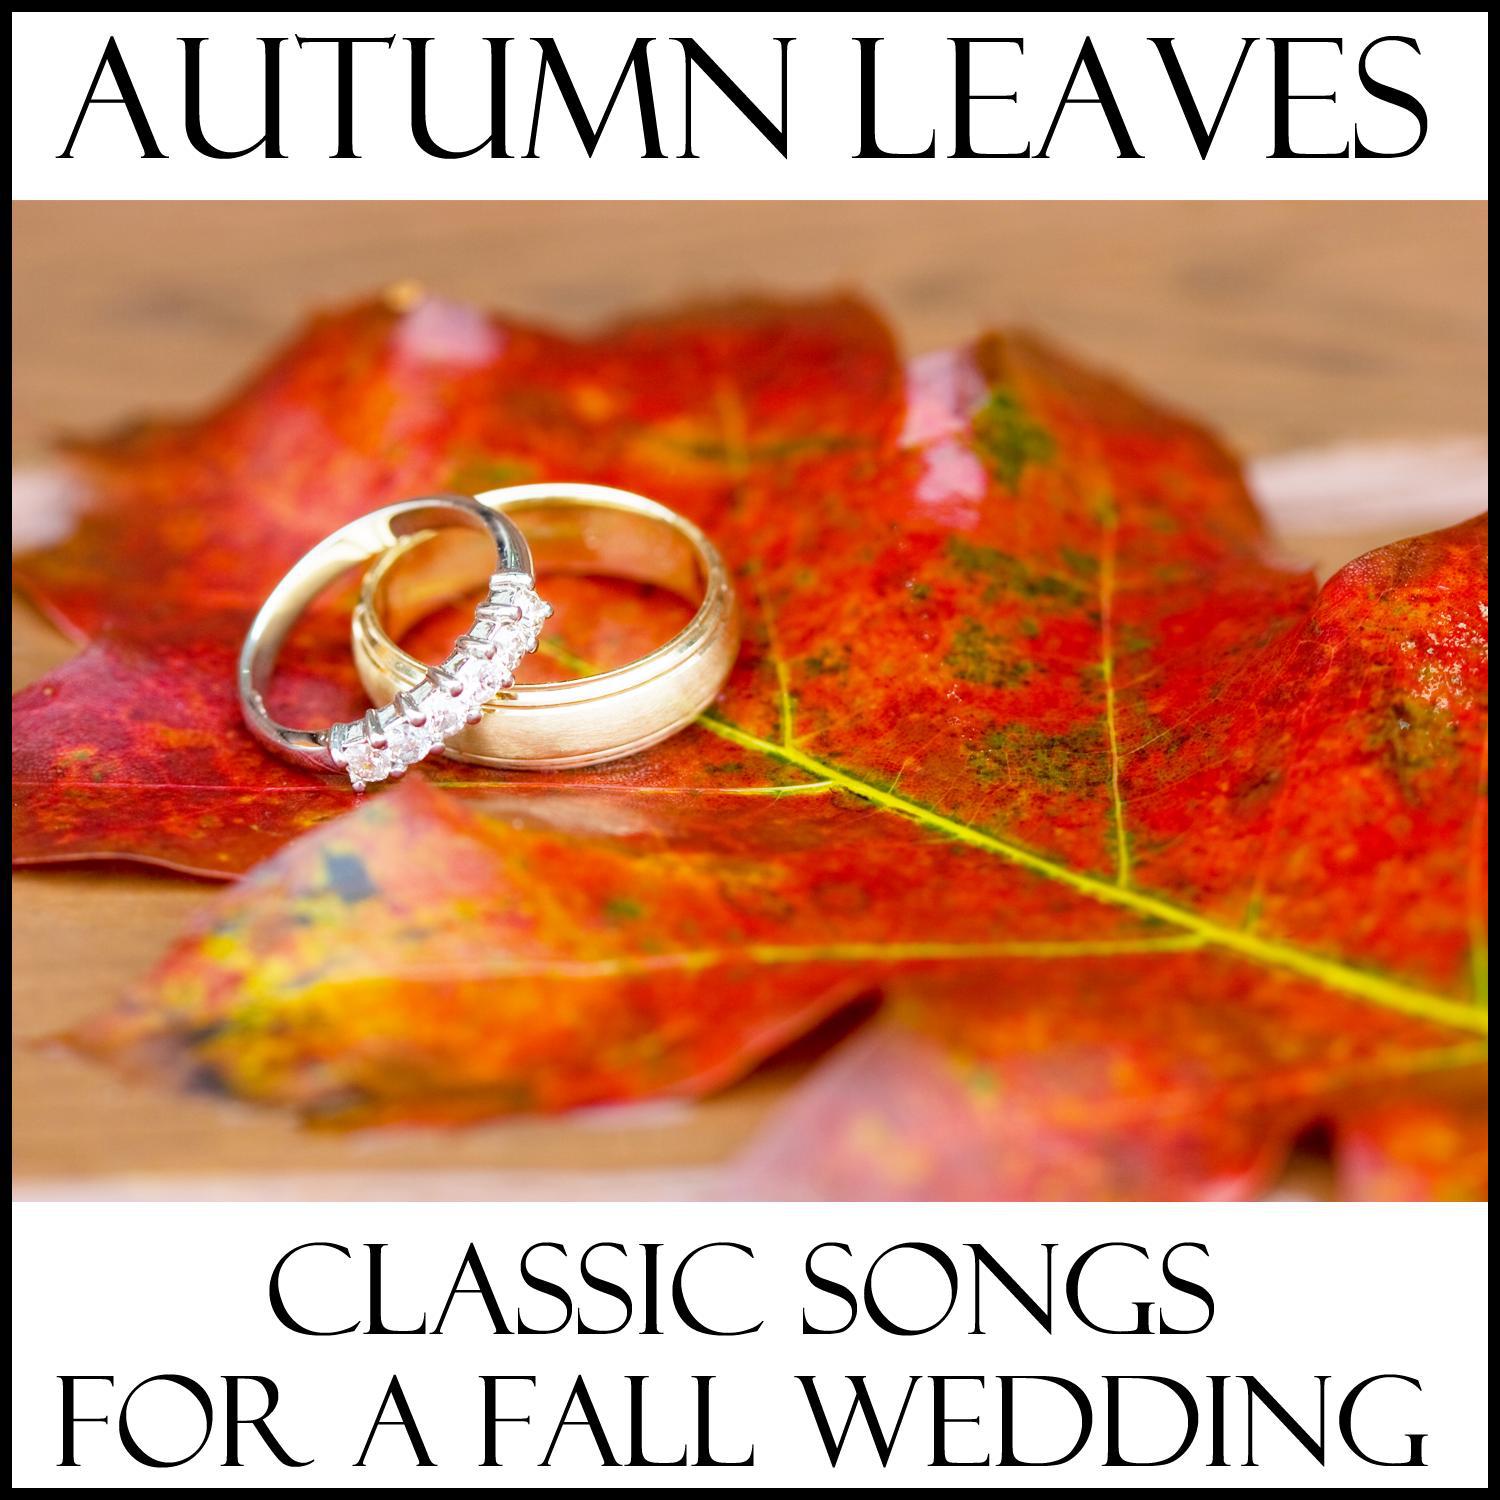 Autumn Leaves: Classic Songs for a Fall Wedding专辑